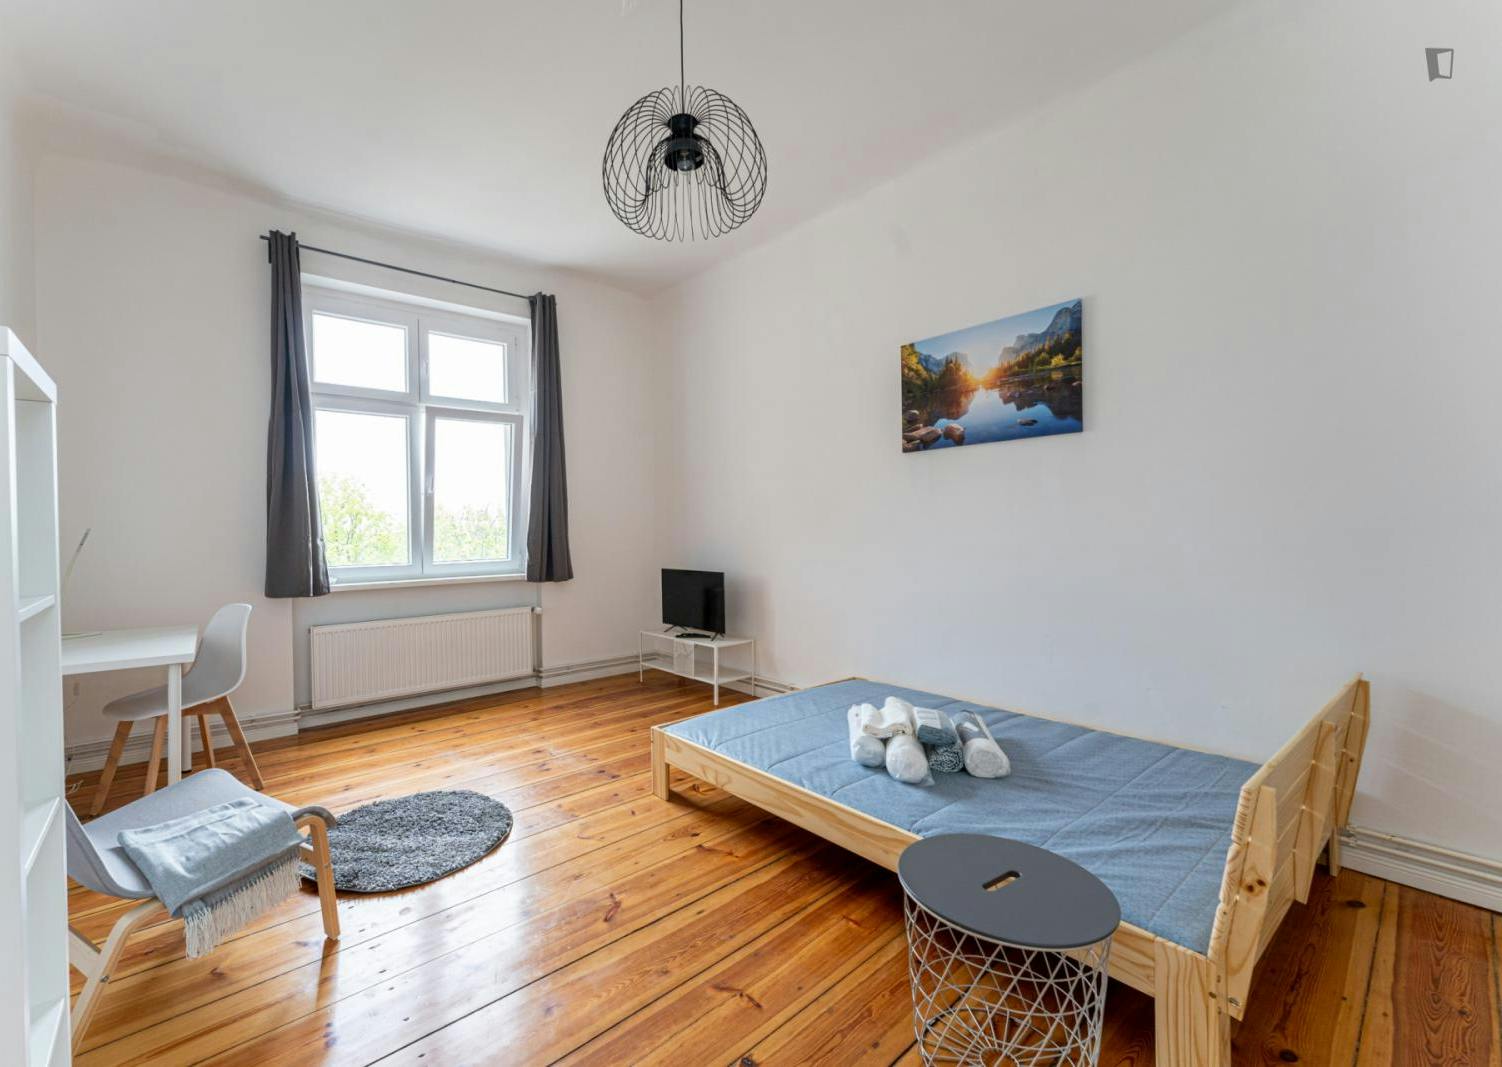 Large double bedroom in a 3 bedroom apartment in Neukölln